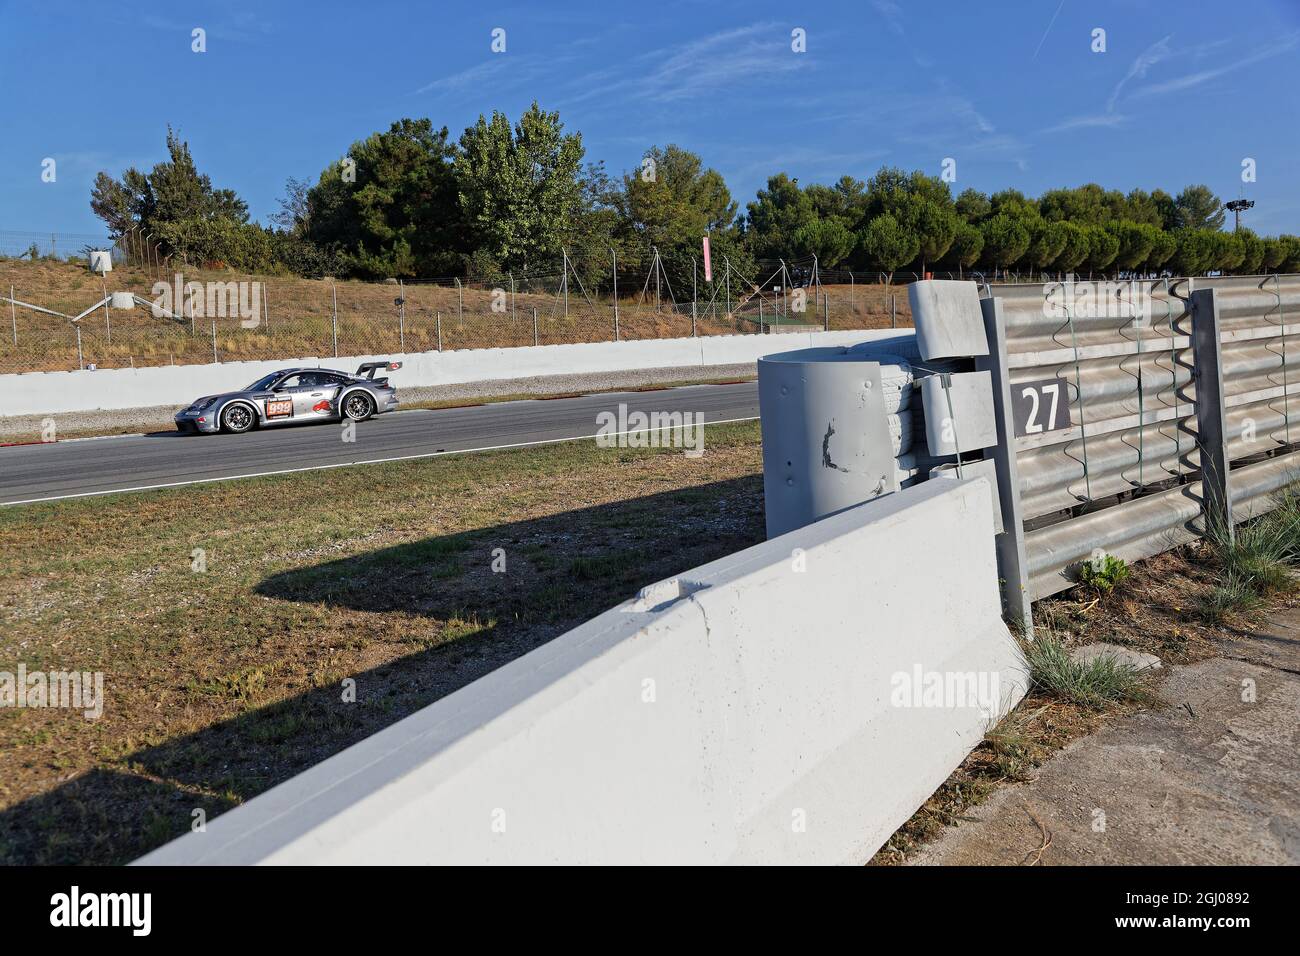 BARCELONA, SPAIN, September 5, 2021 : Porsche 911 and tracks walls during 24h Series, a long distance international racing championship for GT and Tou Stock Photo